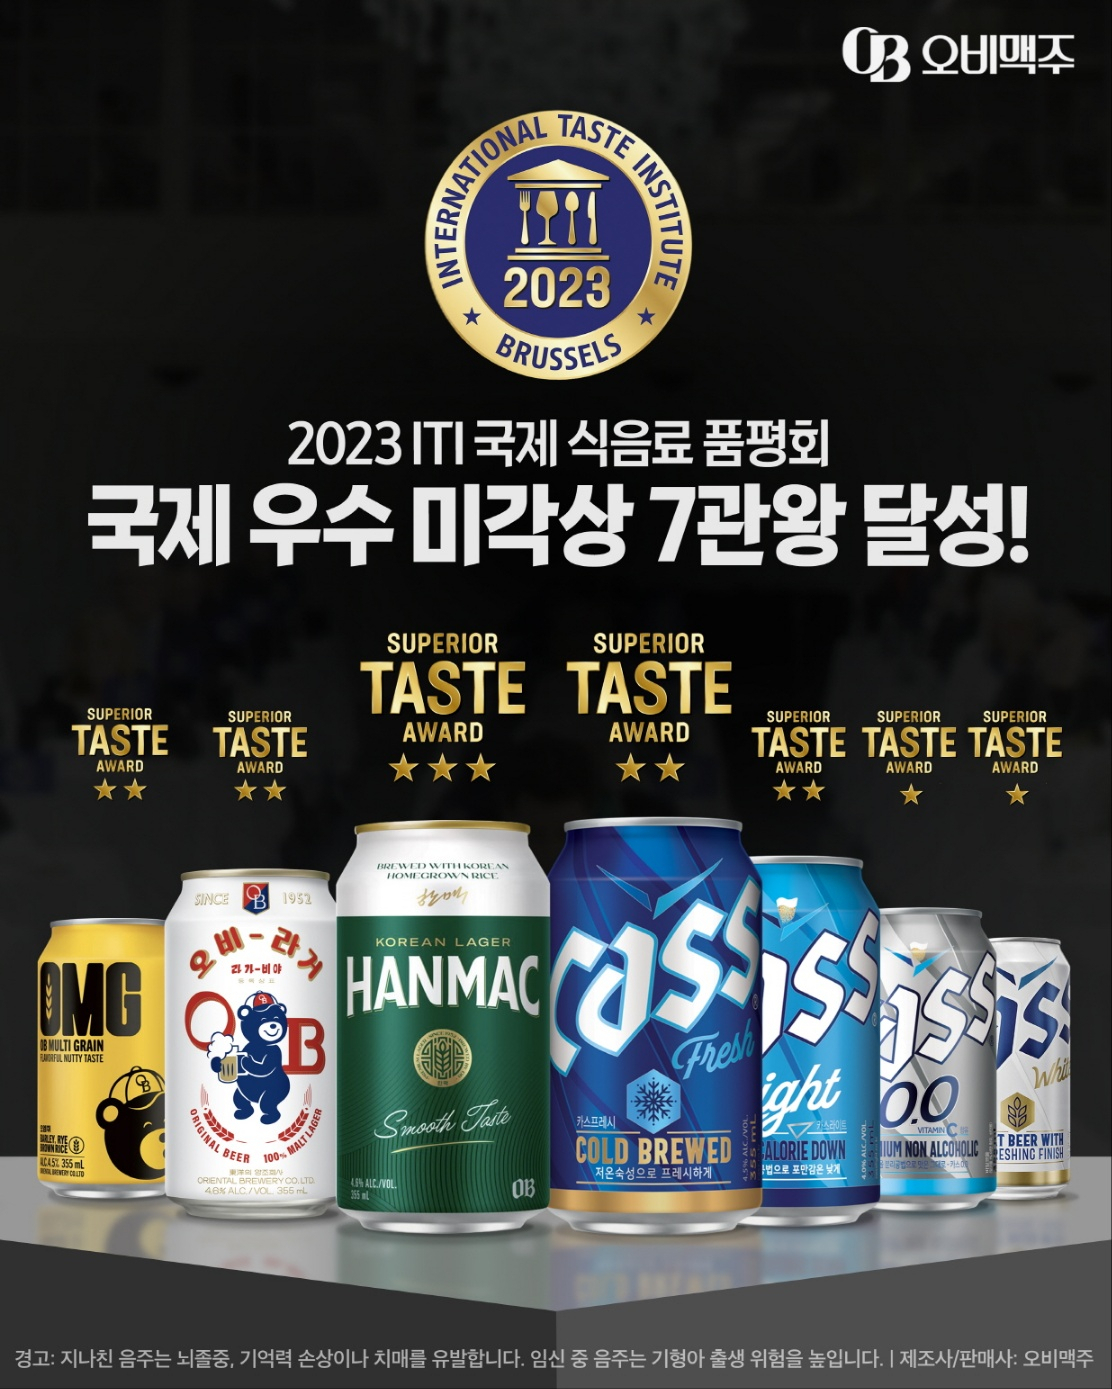 Oriental Brewery's beer brands that received awards in the 2023 Superior Taste Awards (Oriental Brewery)